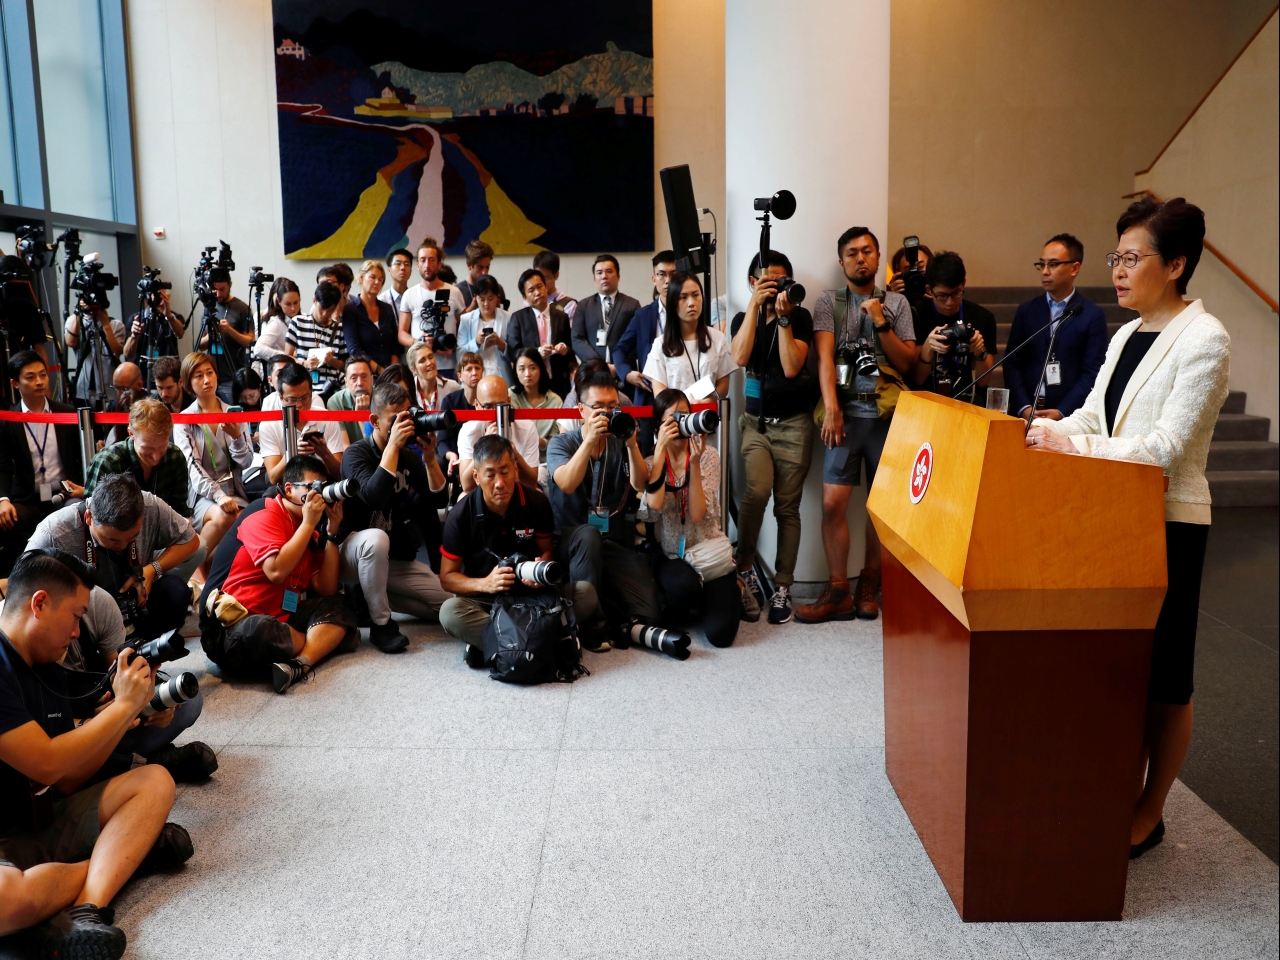 Hong Kong leader announces withdrawal of controversial extradition bill